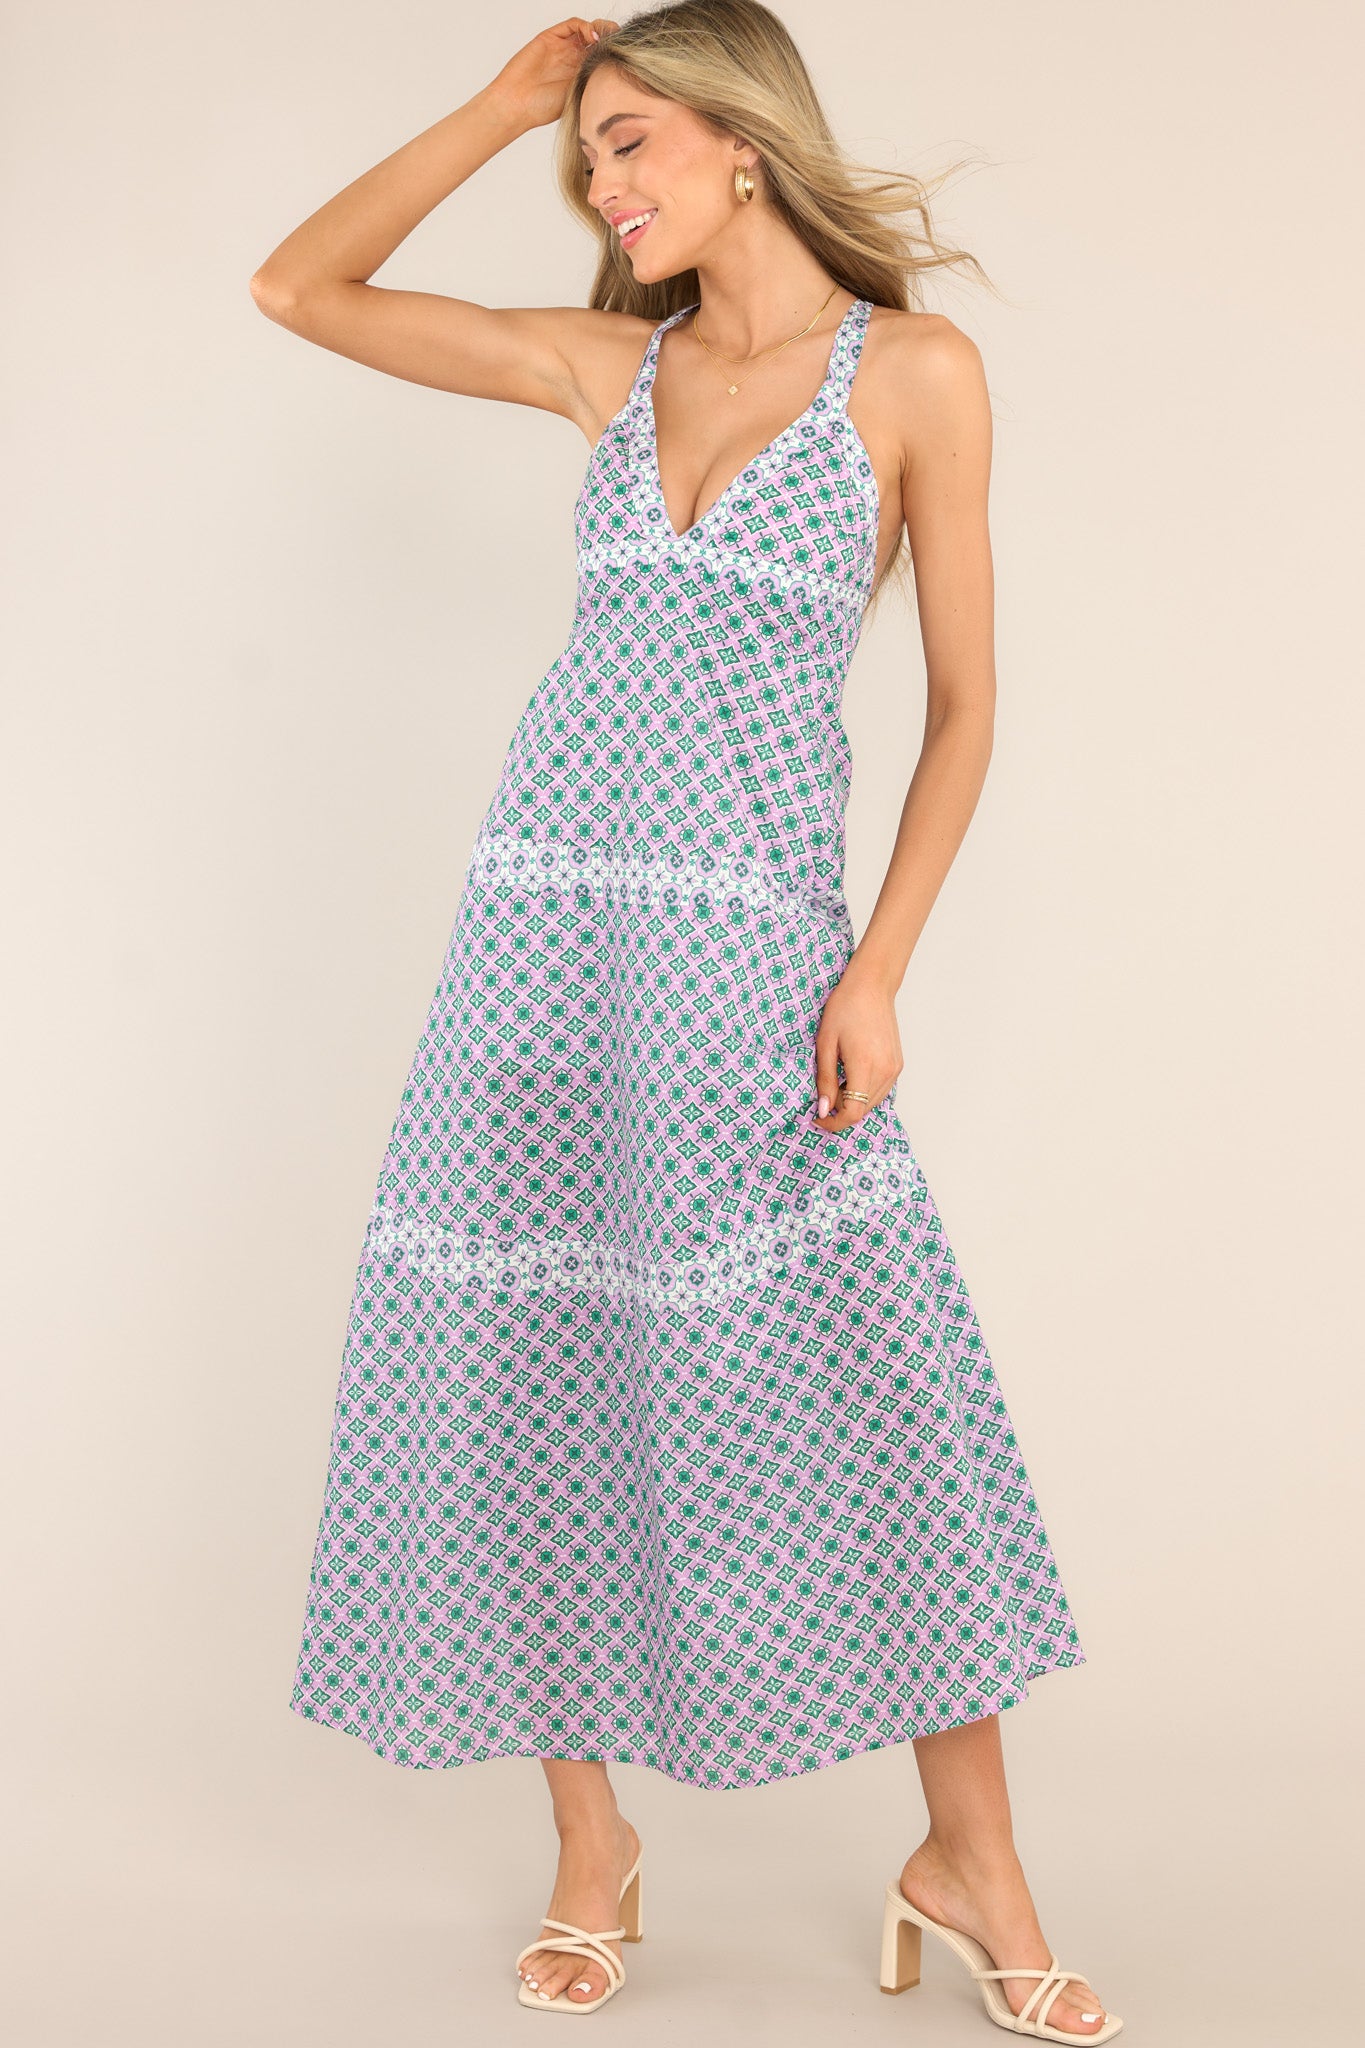 Full body view of this dress that features a deep v-neckline, adjustable straps that cross in the back, a smocked insert in the back, and a tiered design.